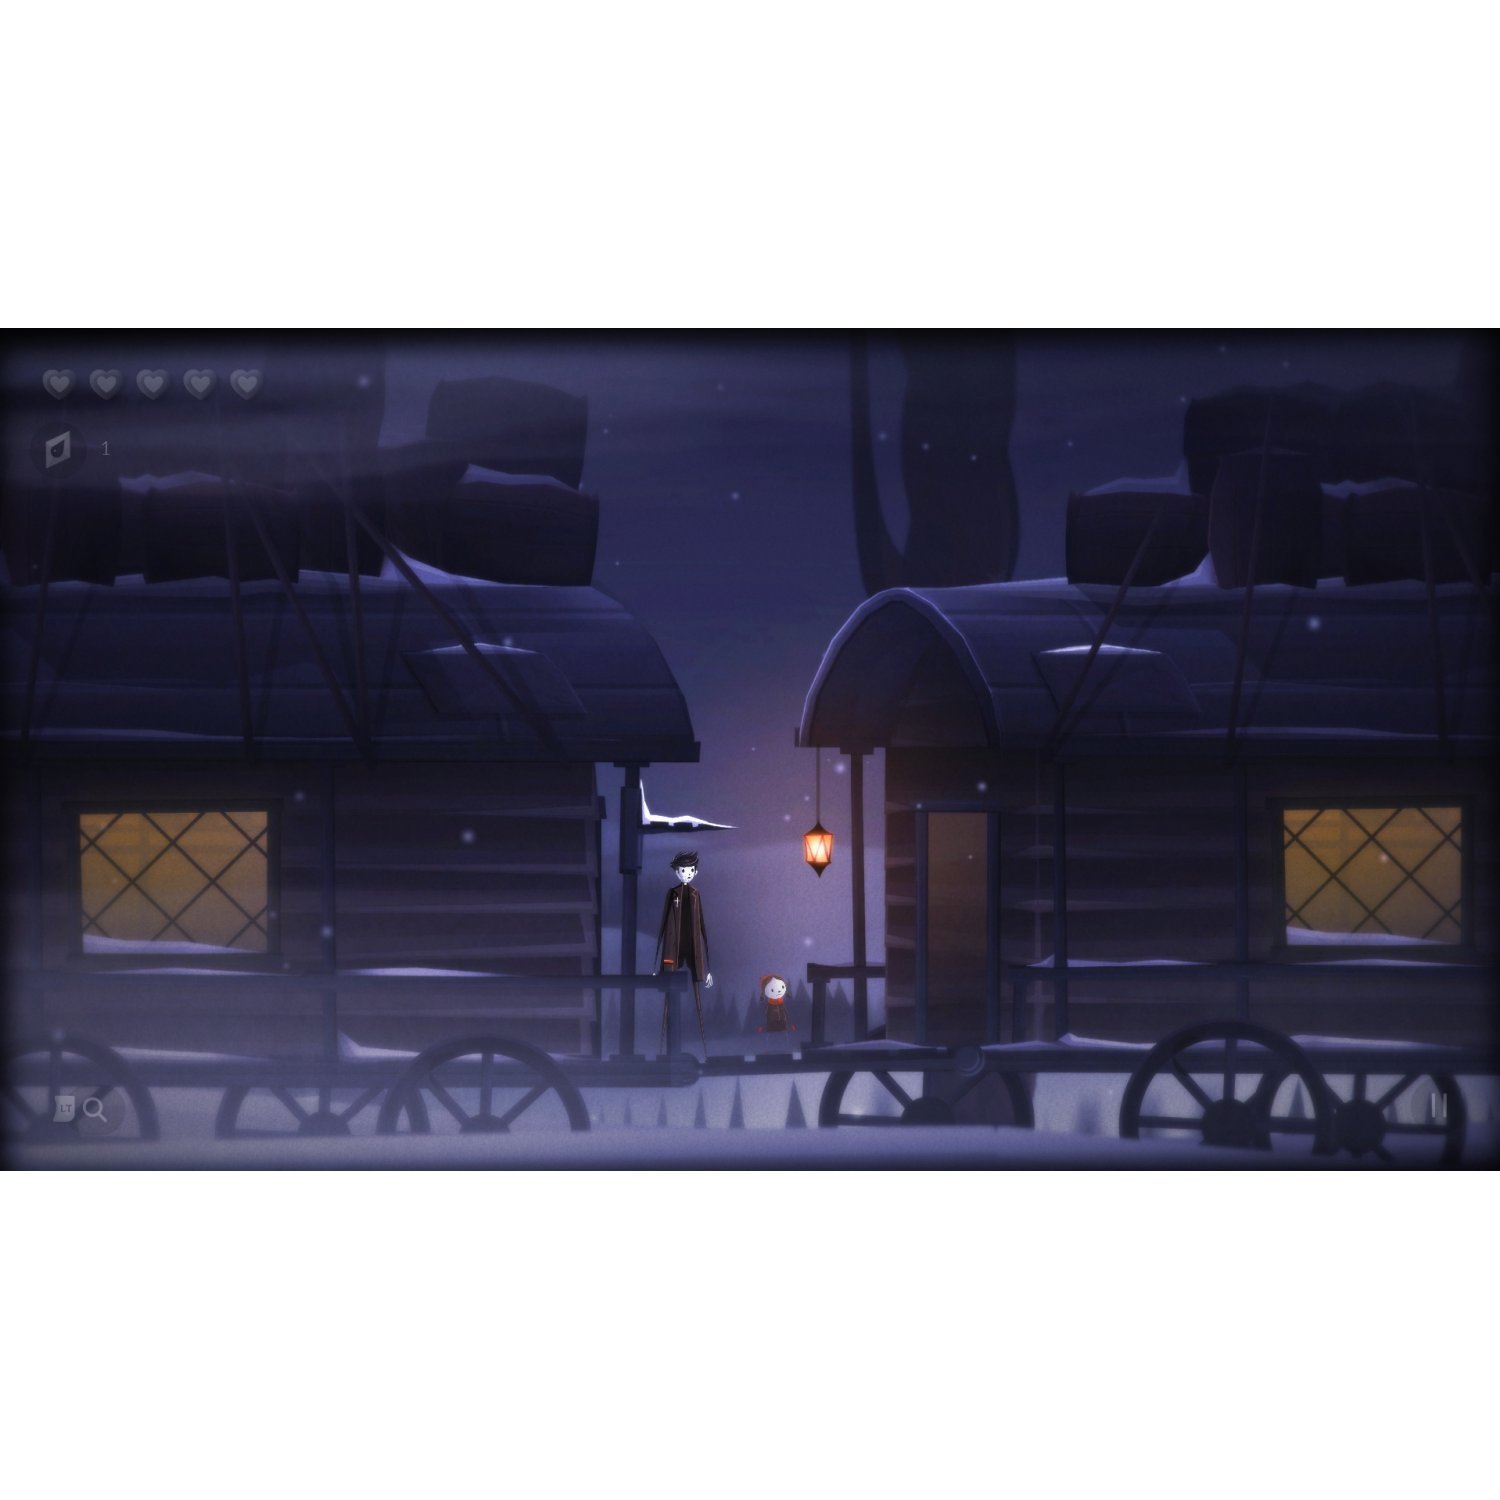 Neversong, Pinstripe, Neversong & Pinstripe, Neversong and Pinstripe, Multi-language, Neversong & Pinstripe (Multi-Language), PS4, PlayStation 4, Beep Japan, Atmos Games, Nintendo Switch, Japan, release date, features, price, pre-order now, trailer, Screenshots